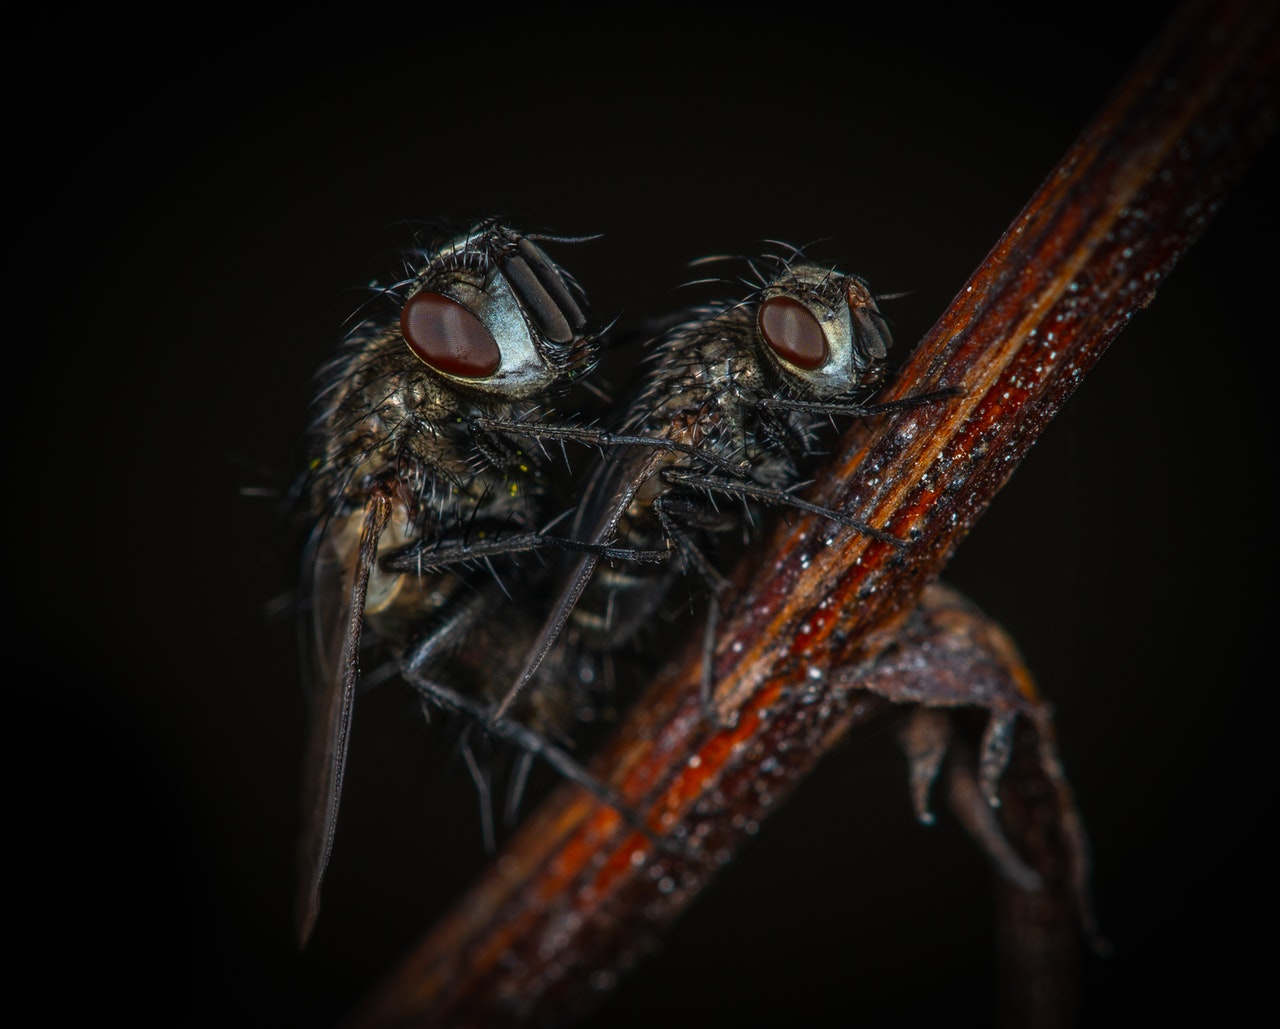 Flies on top of each other